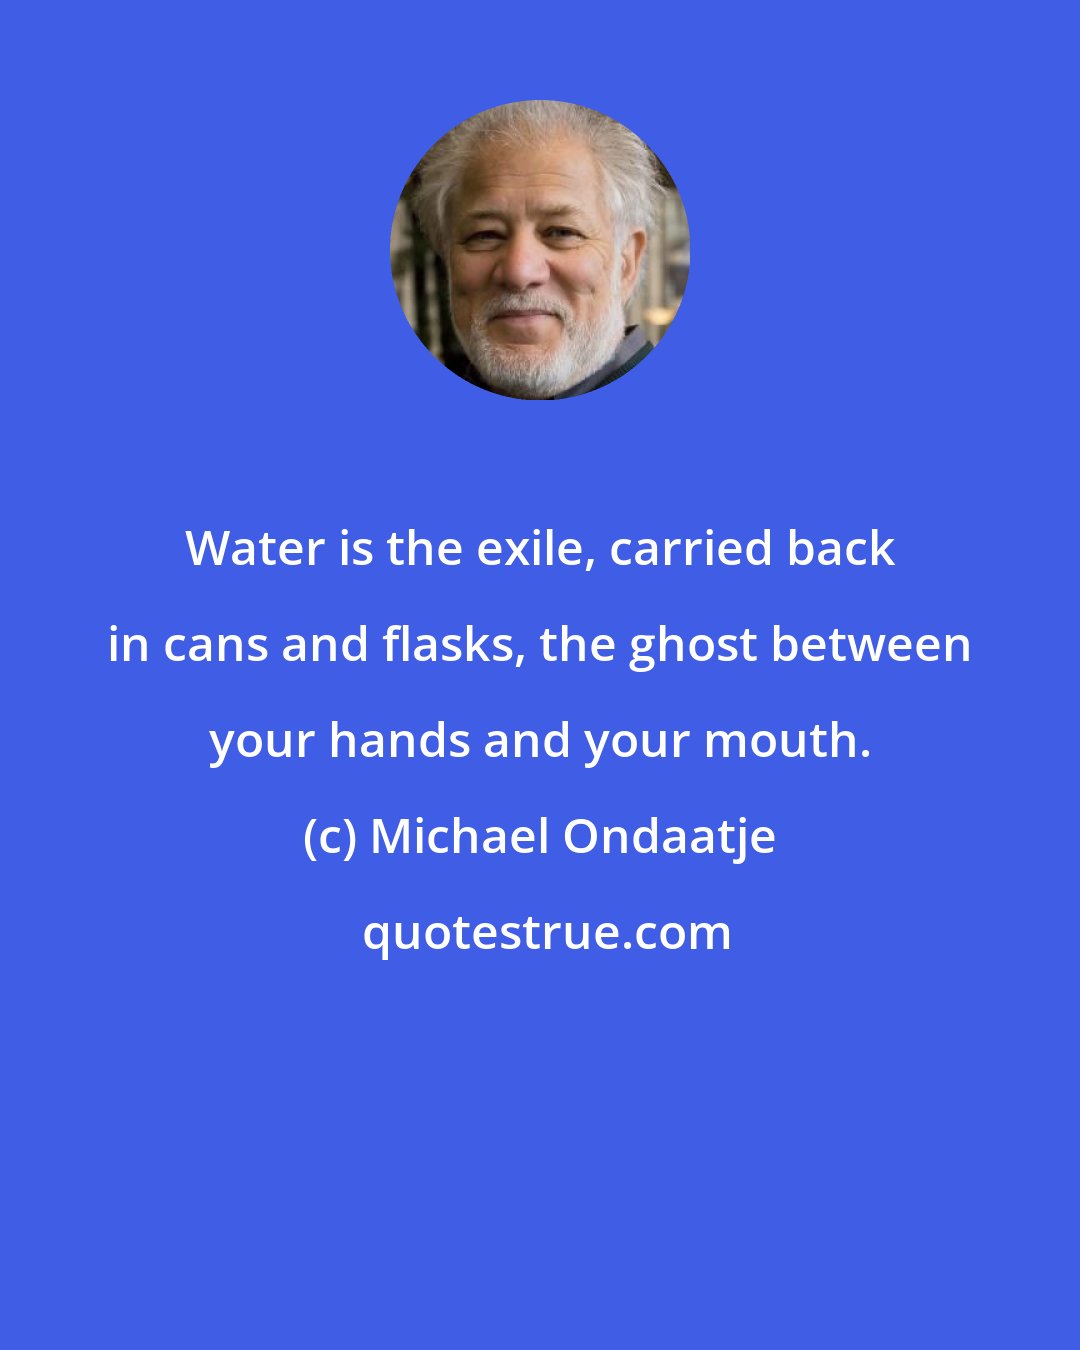 Michael Ondaatje: Water is the exile, carried back in cans and flasks, the ghost between your hands and your mouth.